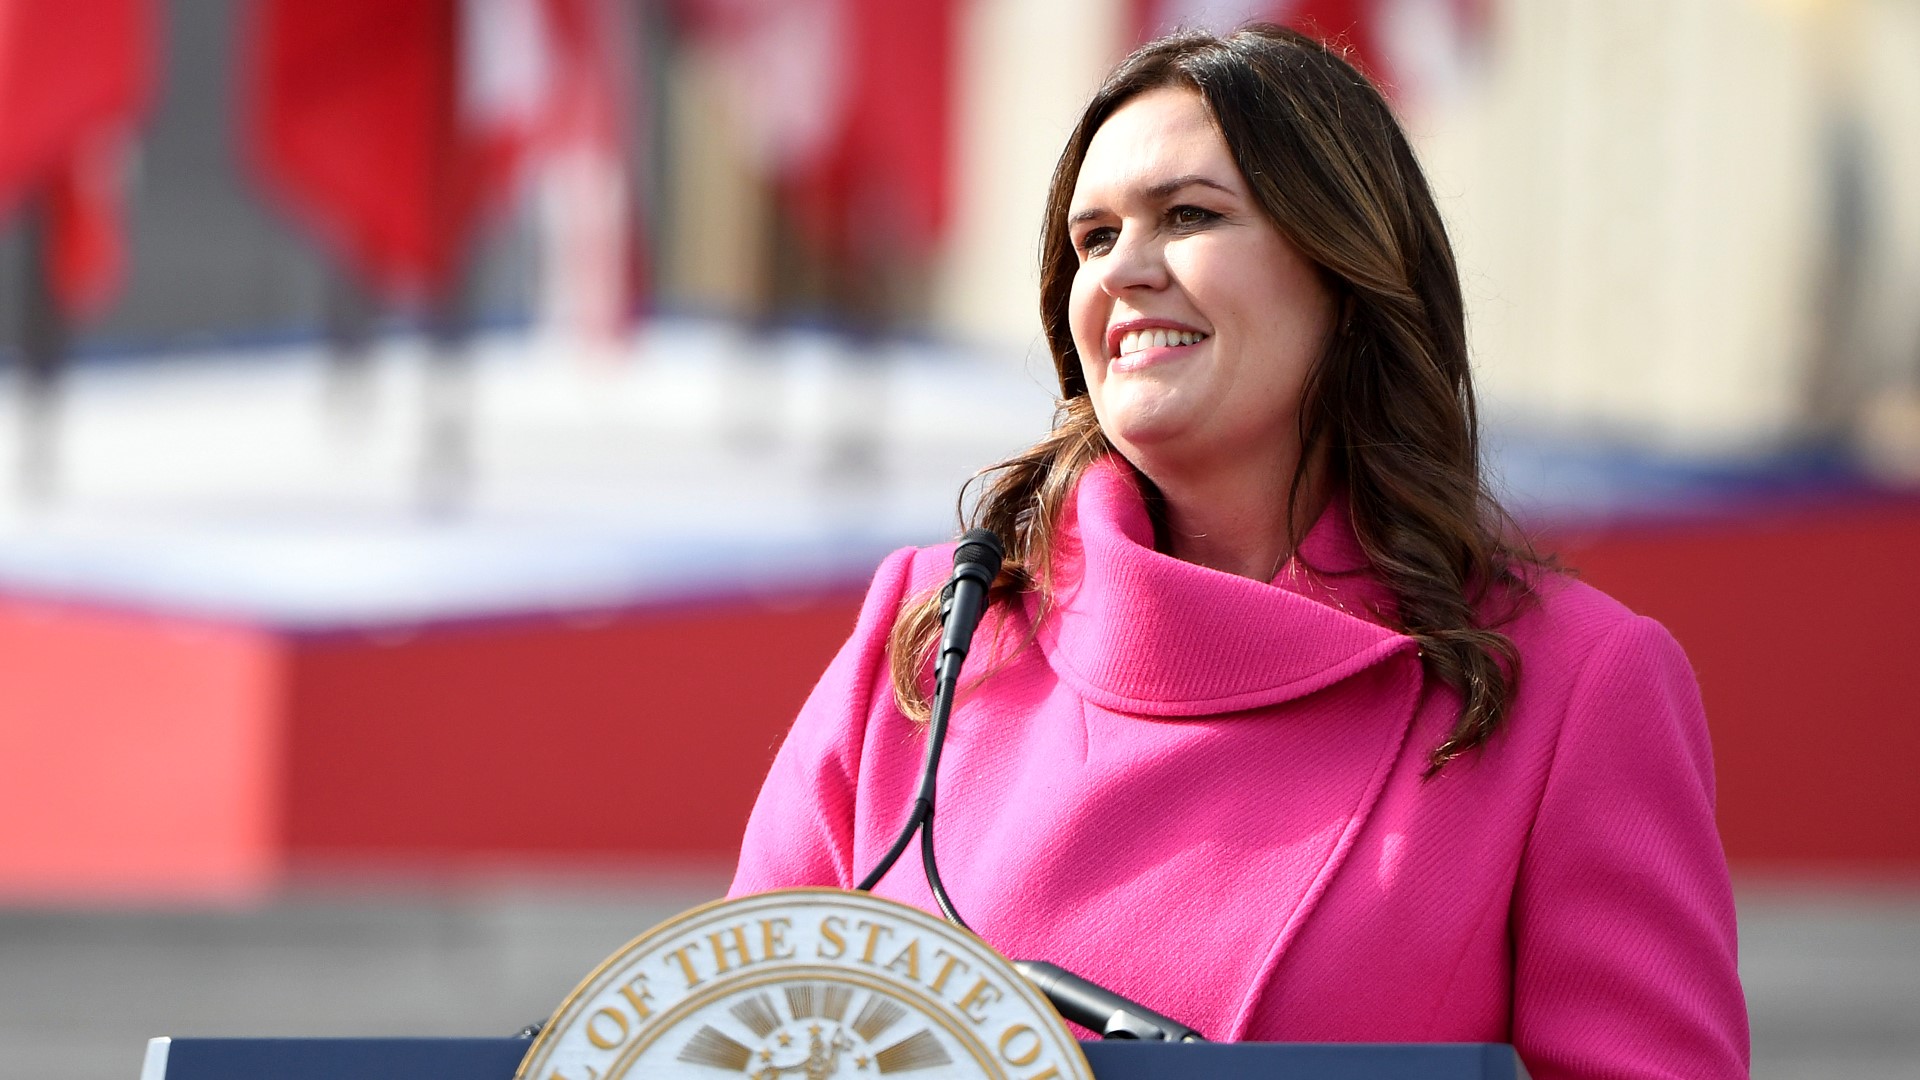 Following the State of the Union address, Arkansas Governor Sarah Huckabee Sanders will deliver the Republican address to the nation.